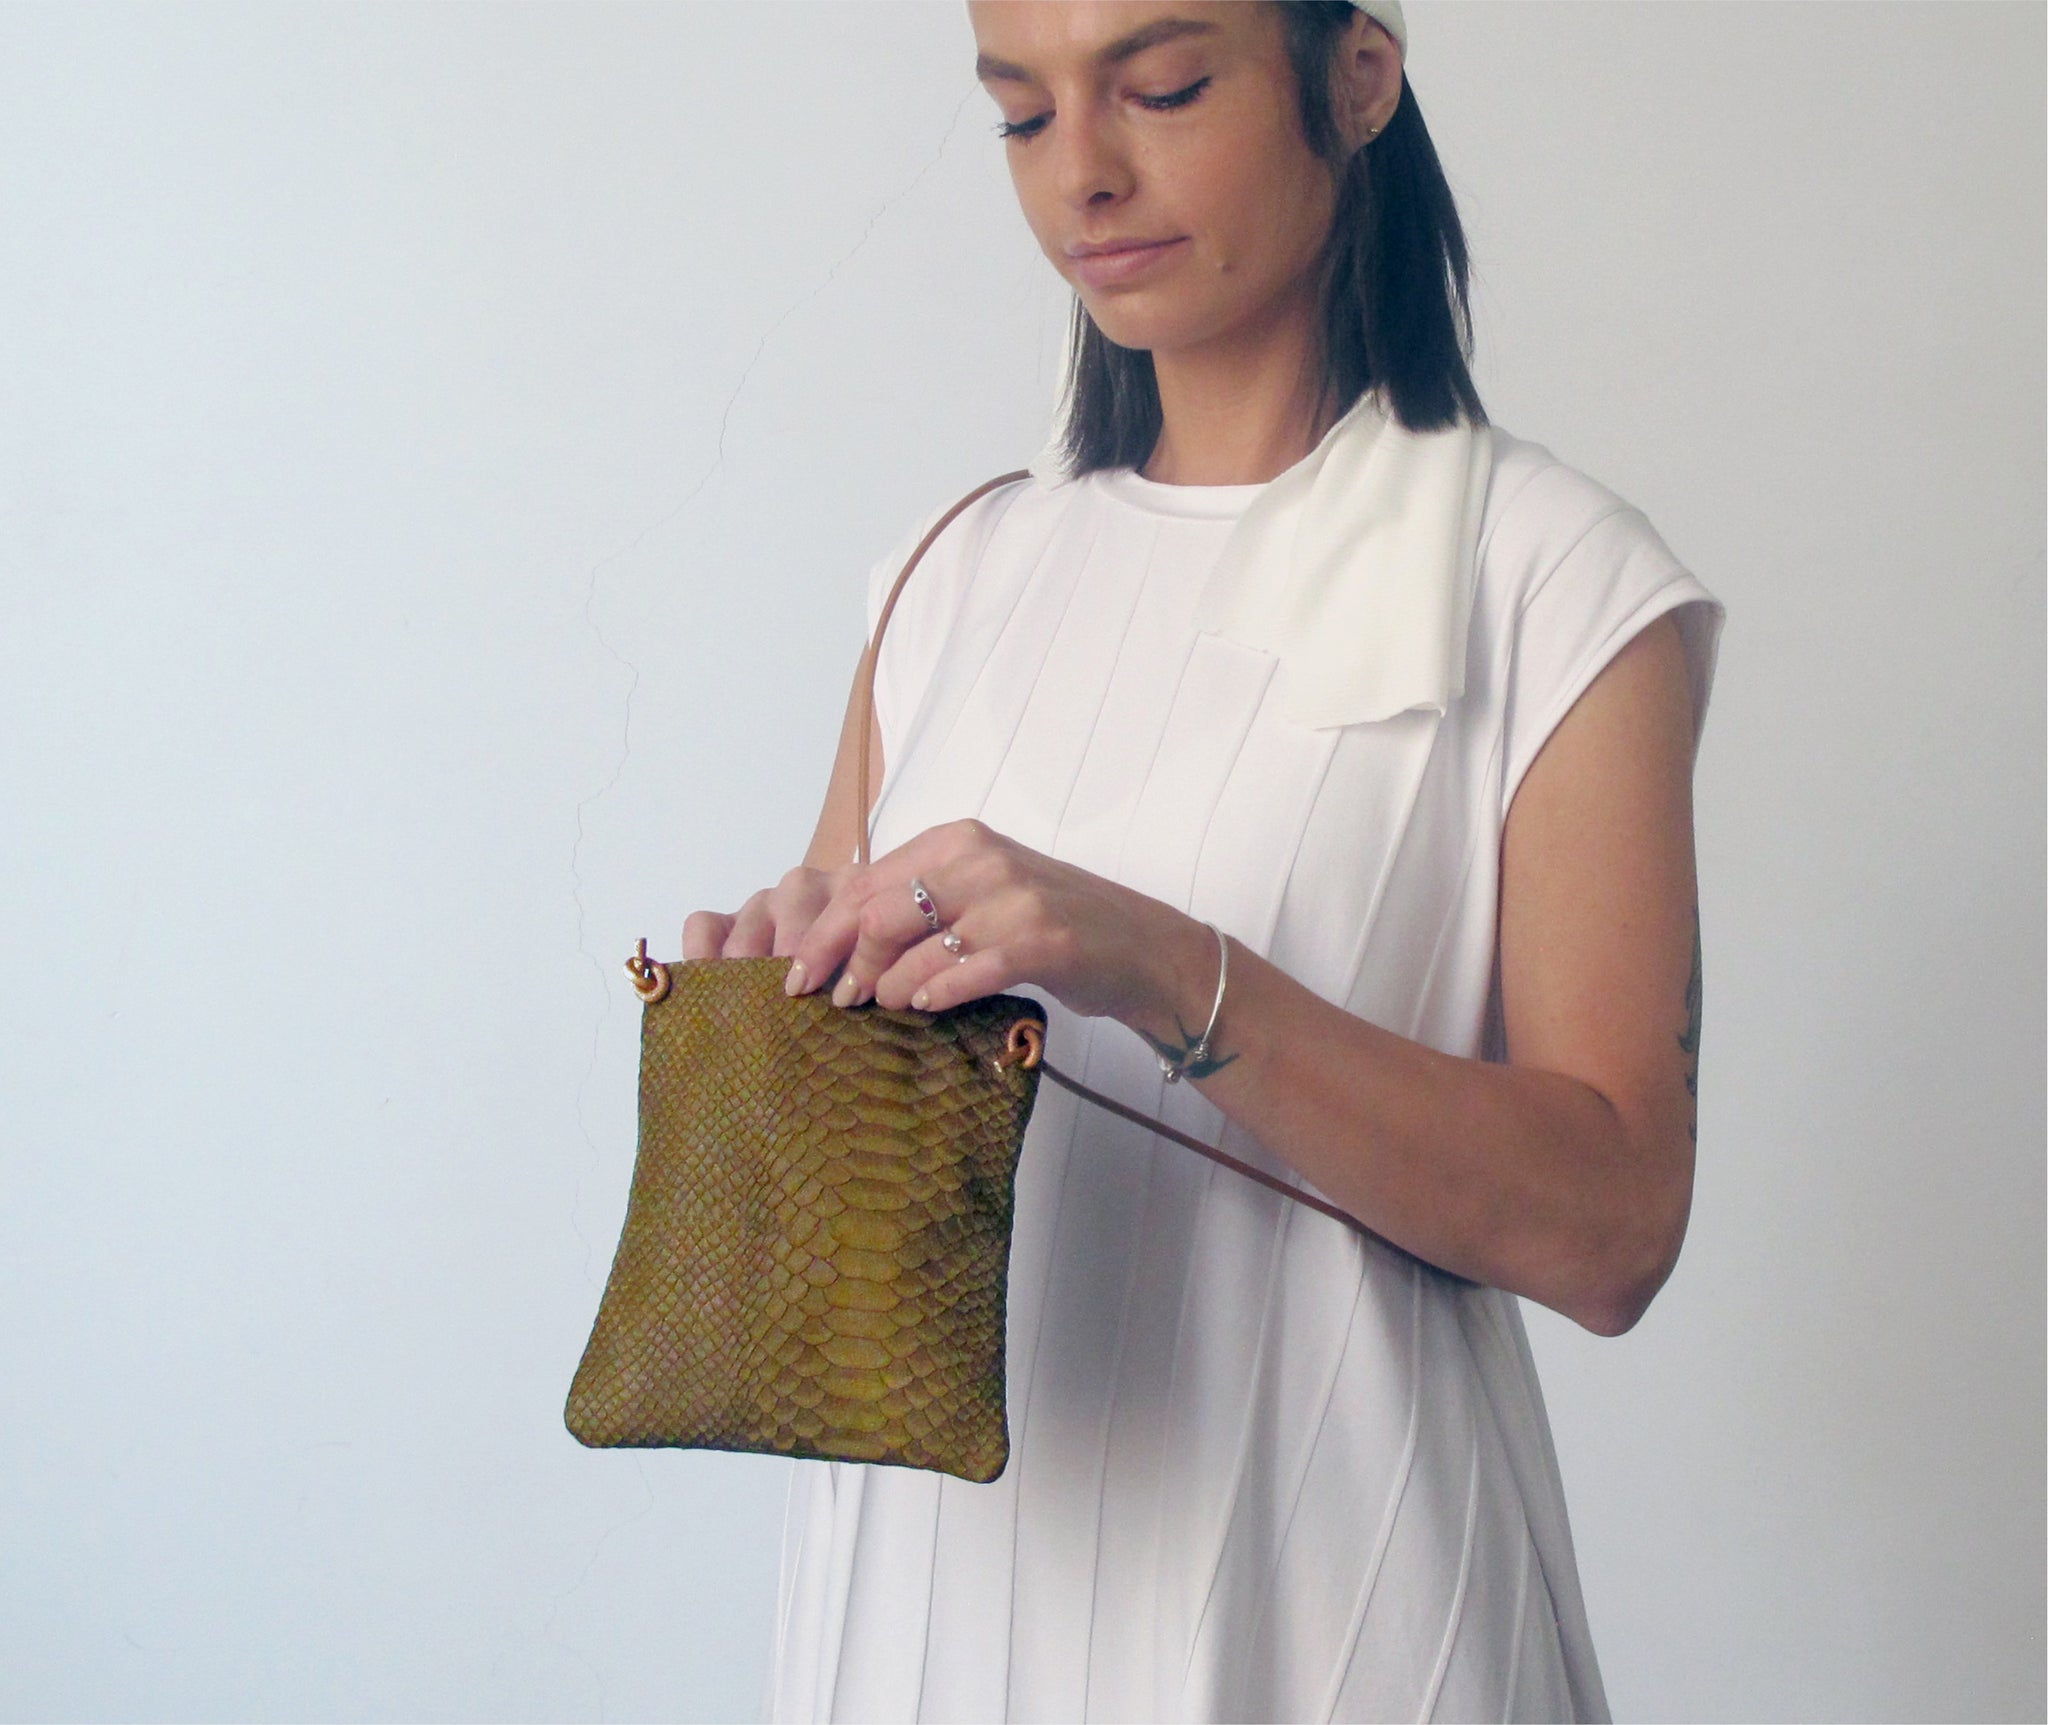 The olive green python purse is crafted in rich Italian leather with an adjustable & detachable shoulder strap to carry it crossbody or as an evening clutch.